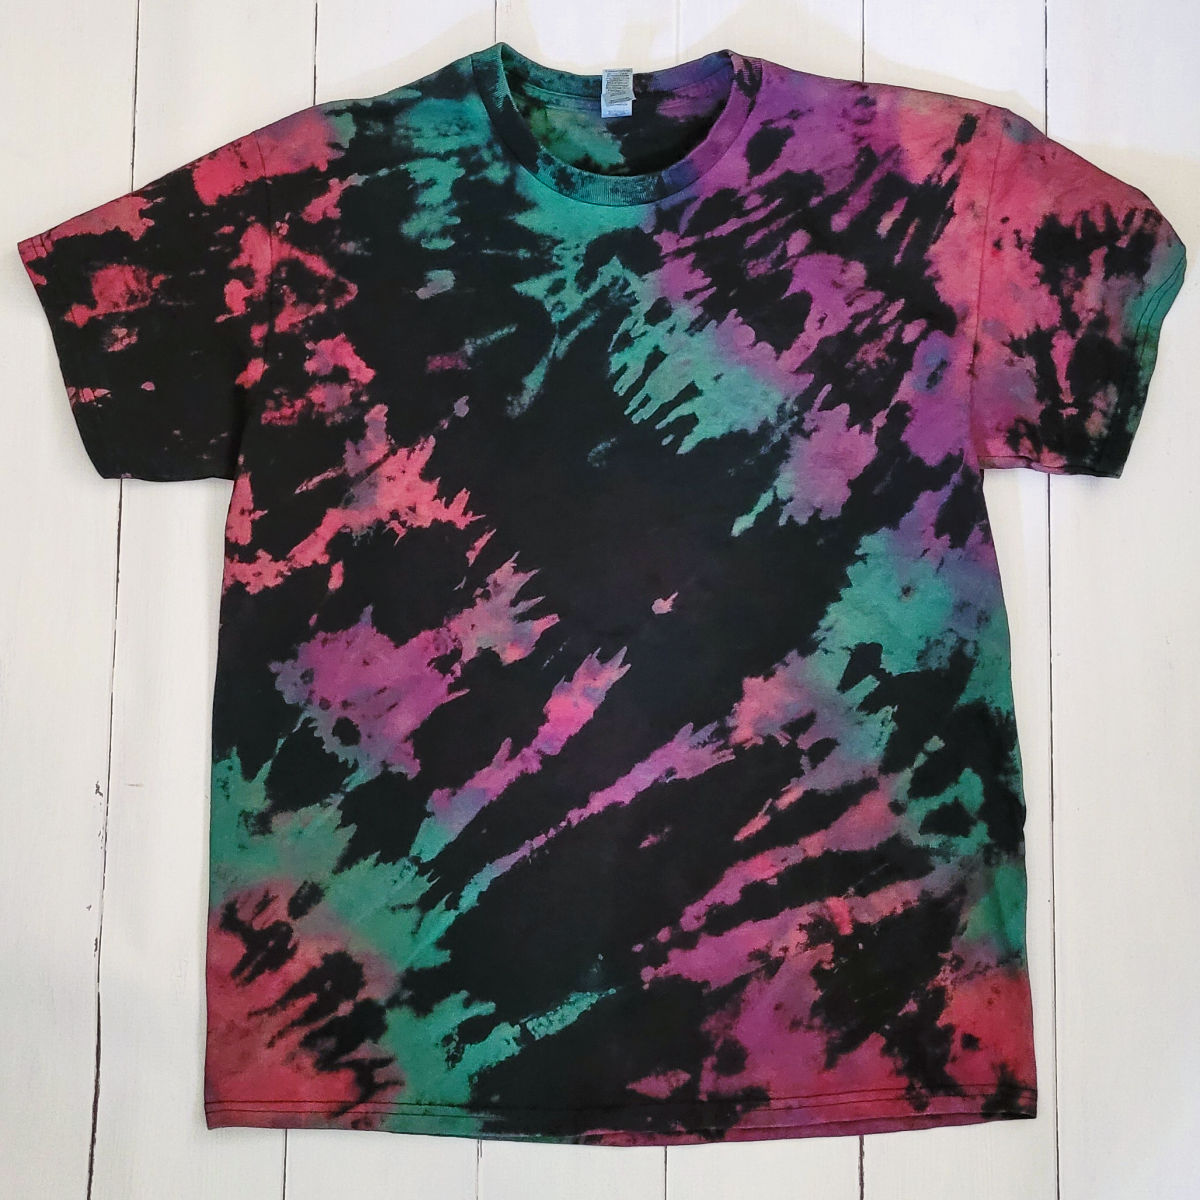 Reverse tie dye shirt in bulleye pattern pulled from the corner of the shirt.